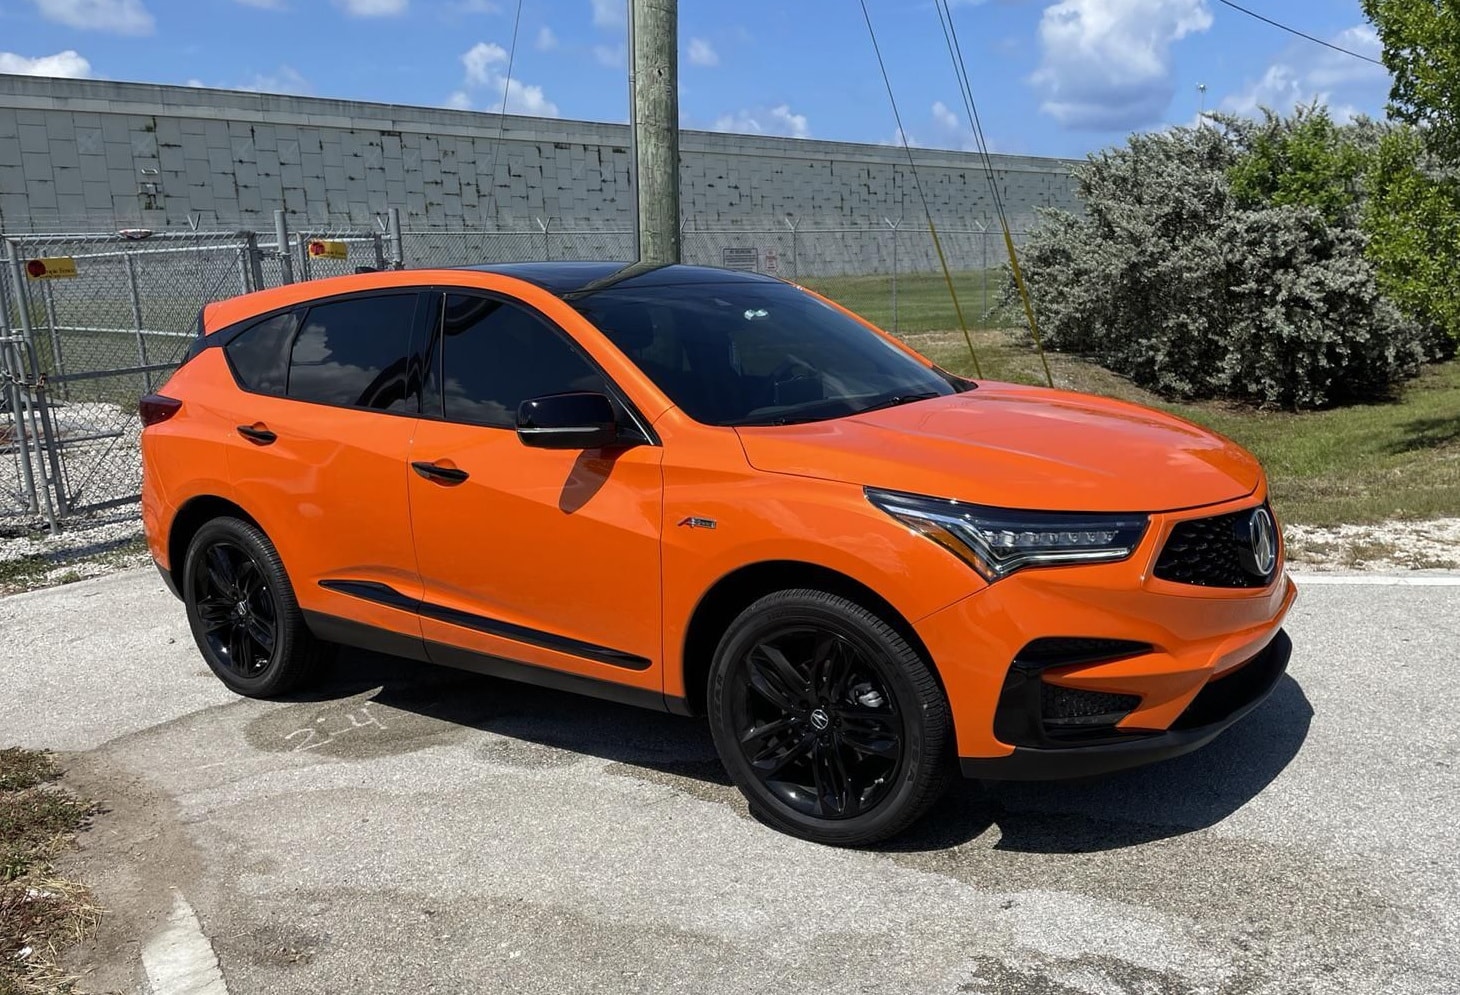 https://s1.cdn.autoevolution.com/images/news/rare-2021-acura-rdx-pmc-edition-up-for-grabs-with-spectacular-thermal-orange-exterior-171822_1.jpeg